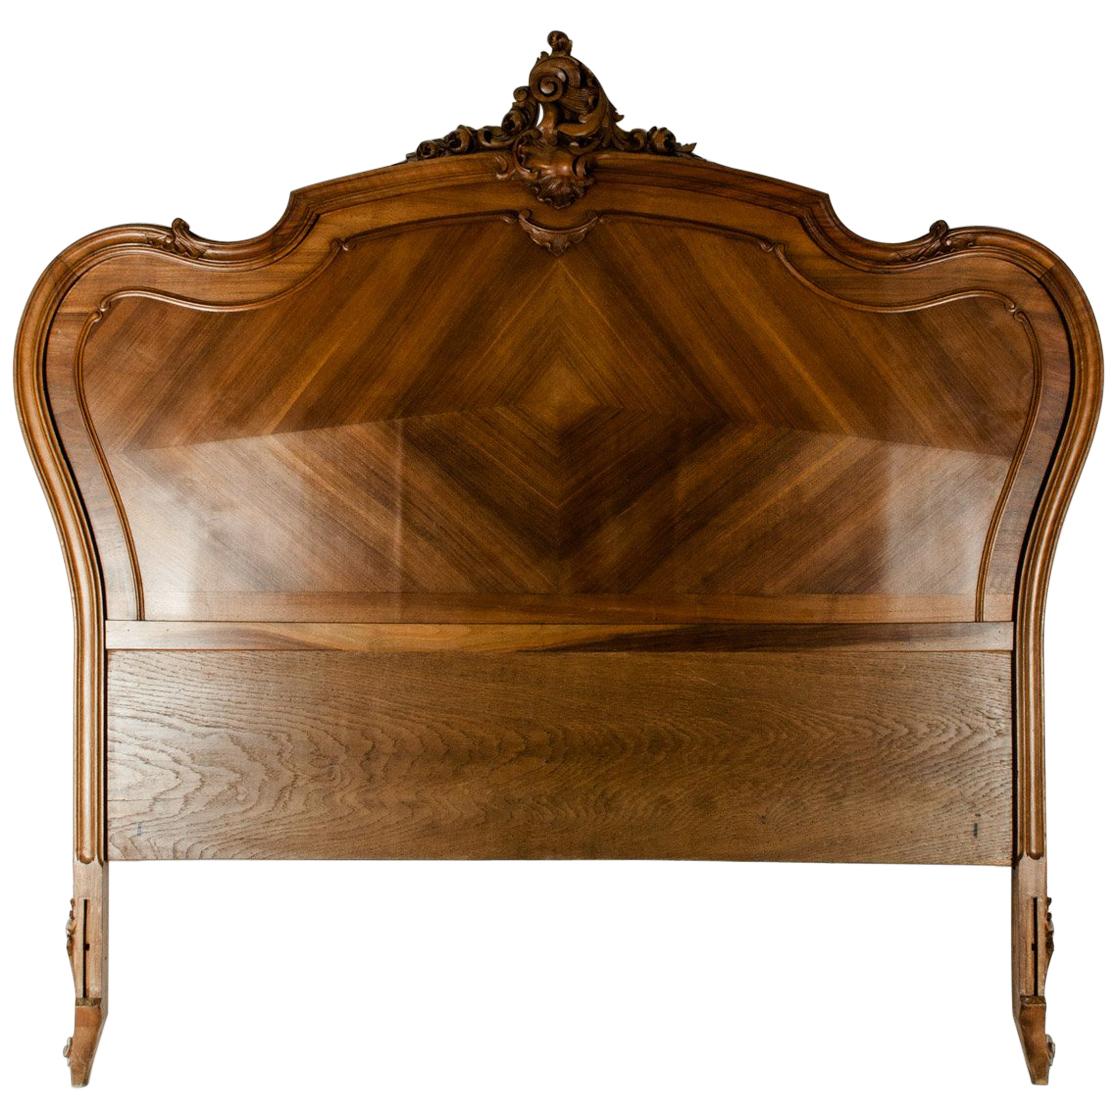 Late 19th Century French Burl Walnut Bed